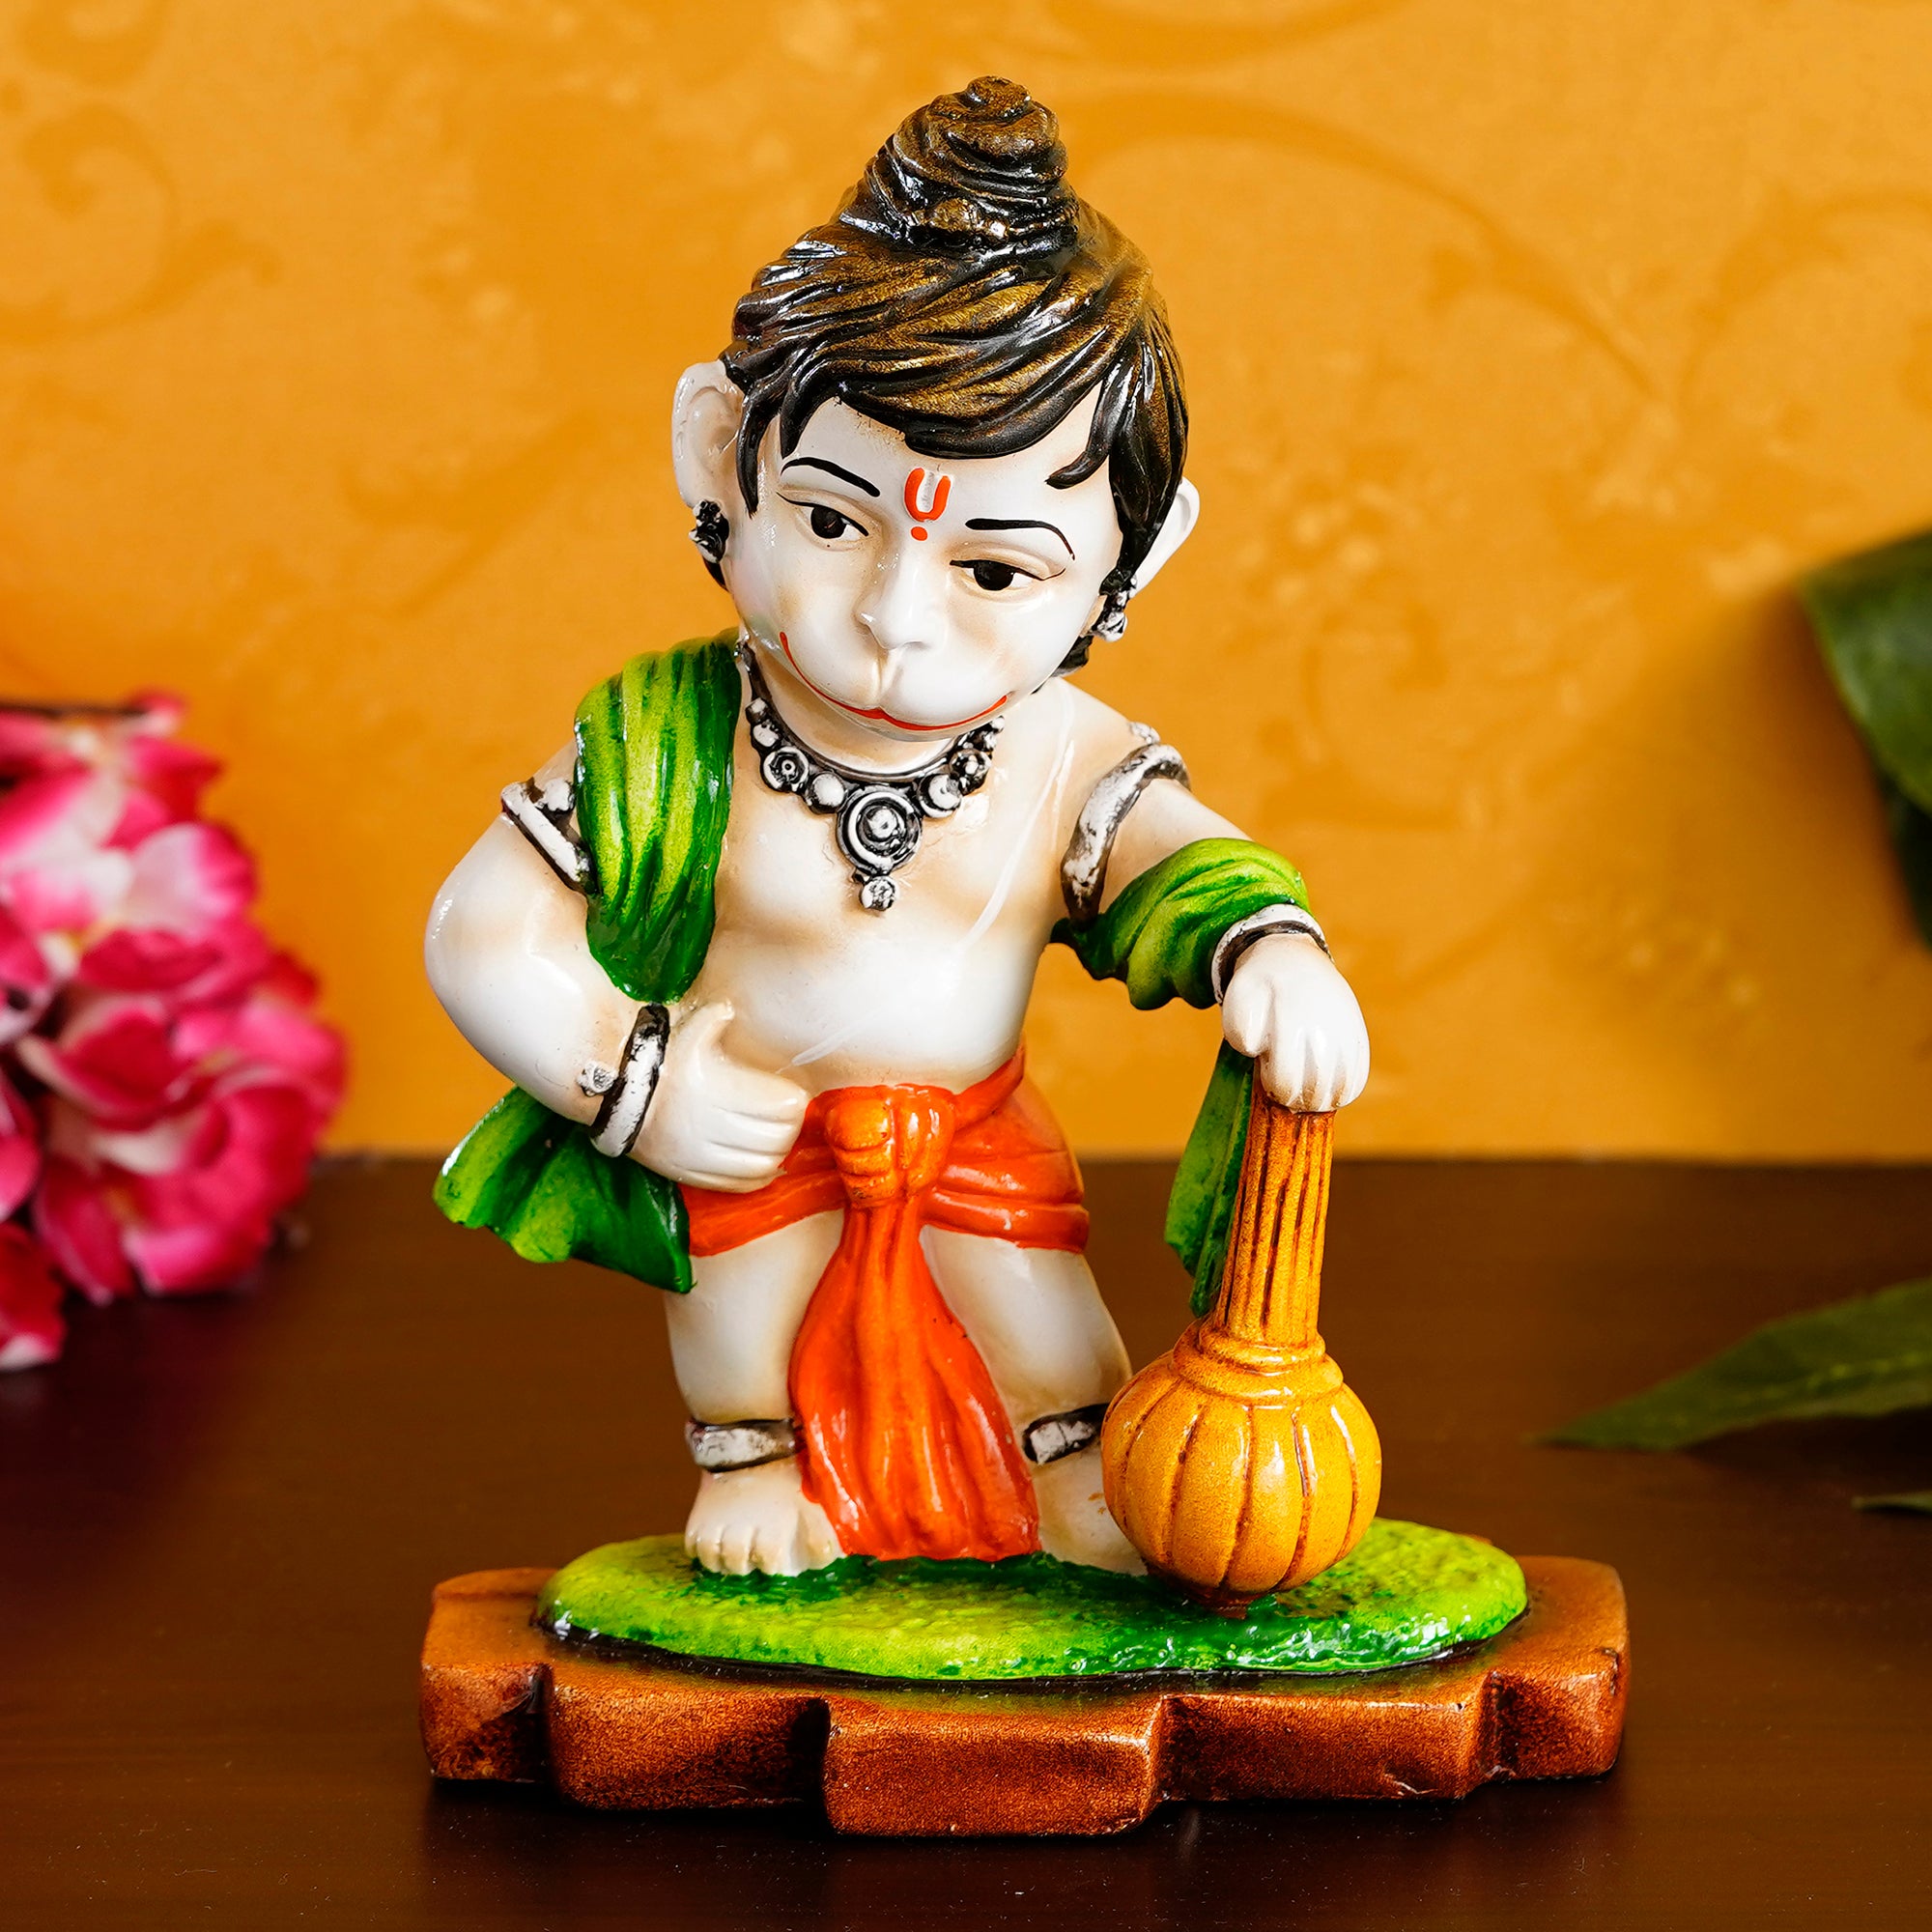 Colorful Standing Lord Hanuman Statue With Gada/Mace Handcrafted Polyresin Religious Idol